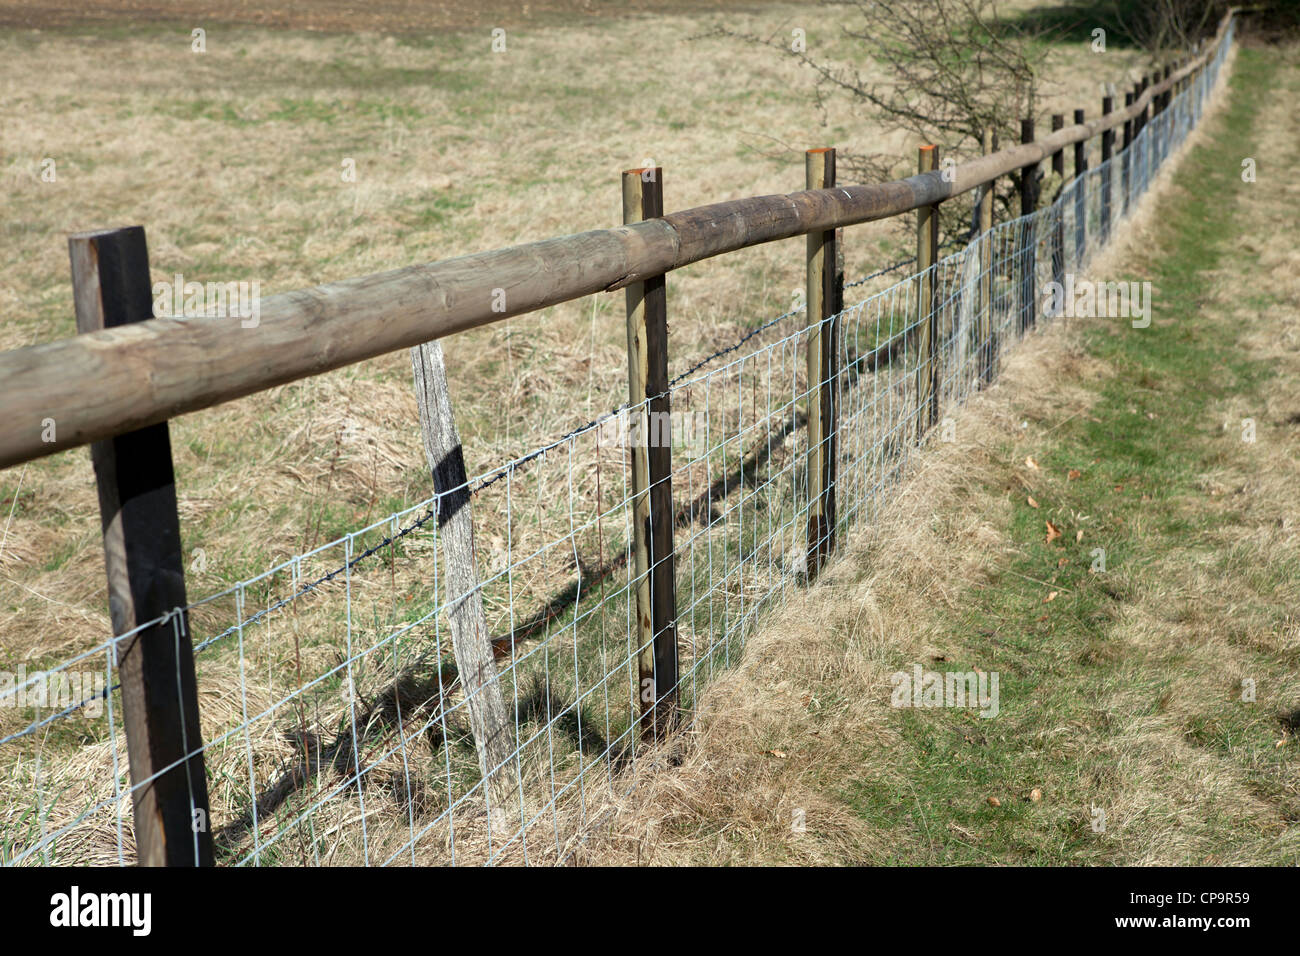 https://c8.alamy.com/comp/CP9R59/stock-fencing-post-and-rail-with-sheep-netting-CP9R59.jpg